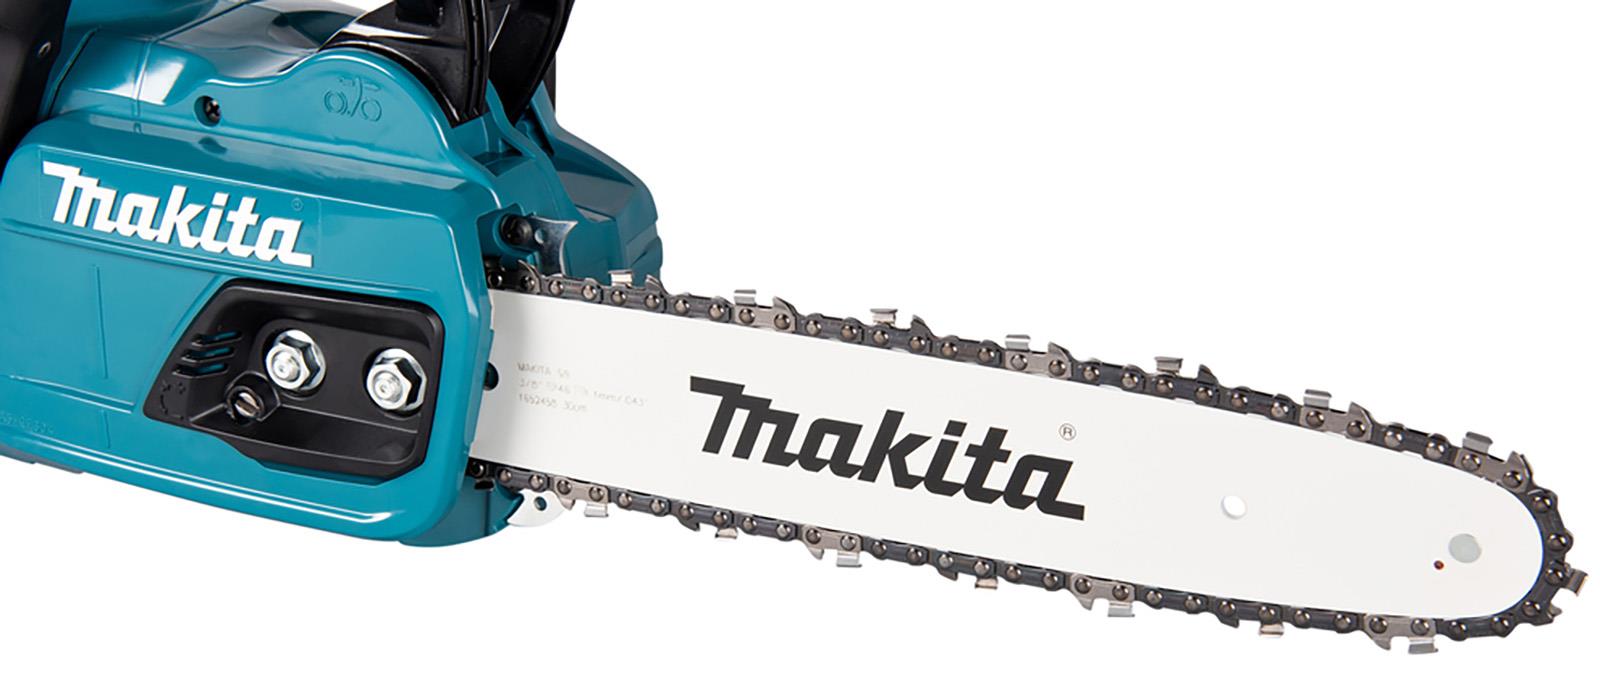 Makita Chainsaw Kit 30cm 12" 18V x 2 LXT Brushless Cordless 2 x 5Ah Battery and Dual Rapid Charger Garden Tree Cutting Pruning DUC305PT2